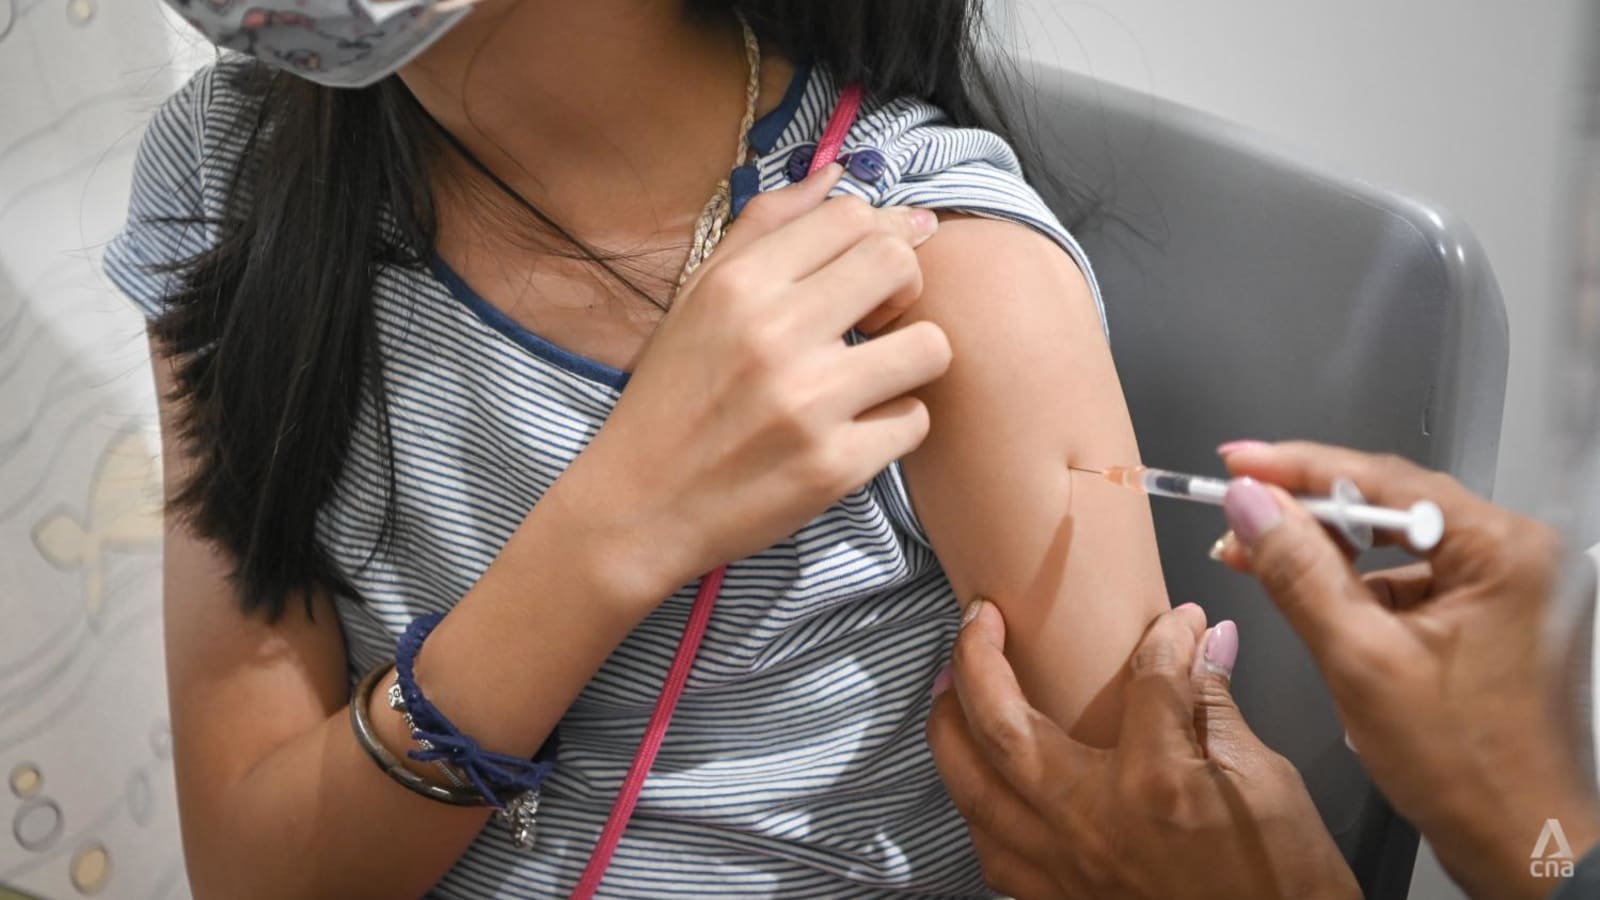 More than 50% of primary school students have signed up to get vaccinated: Chan Chun Sing